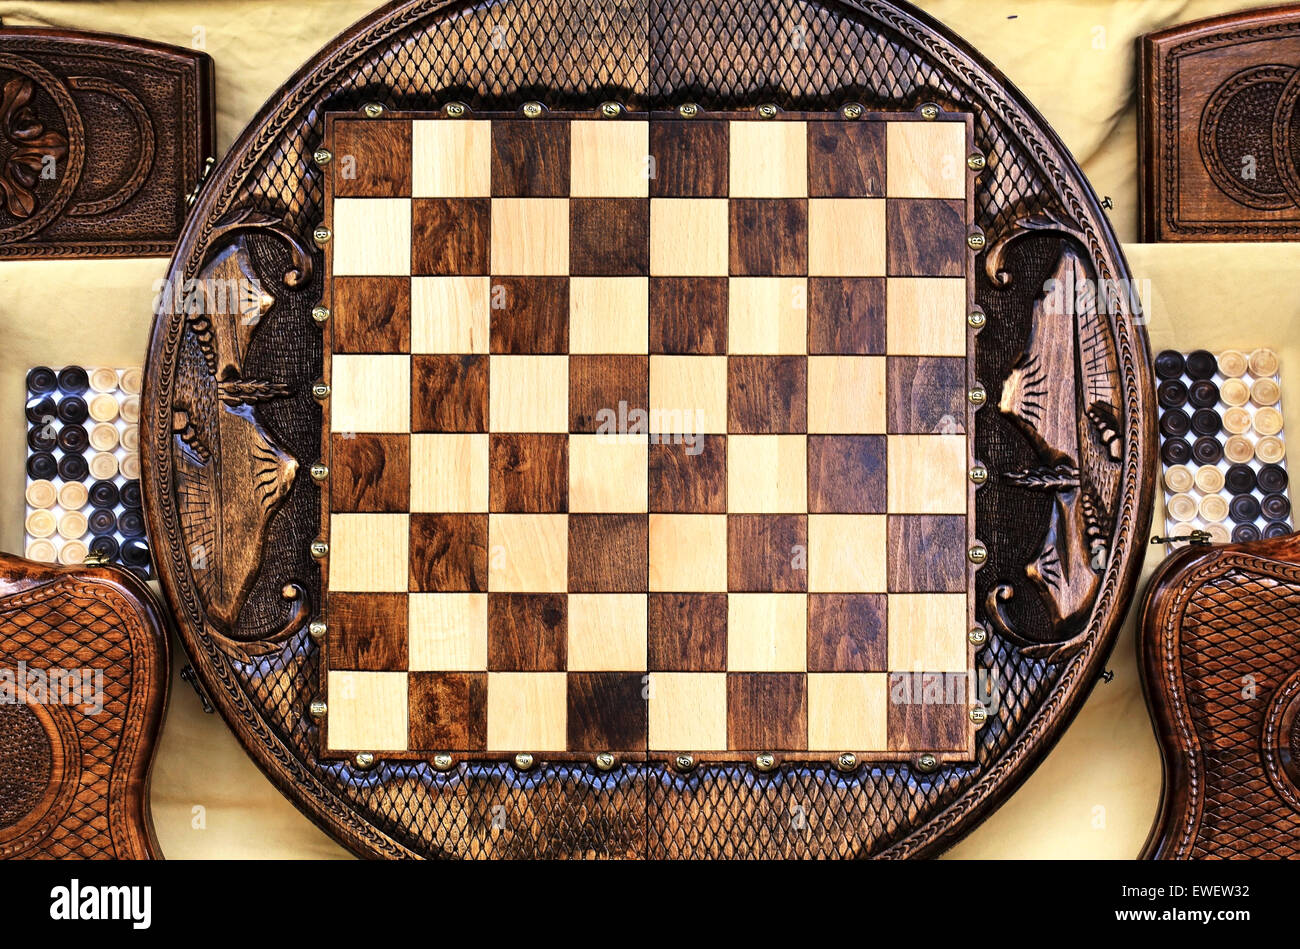 Checkerboard of the round shape made of wood and decorated with carvings Stock Photo